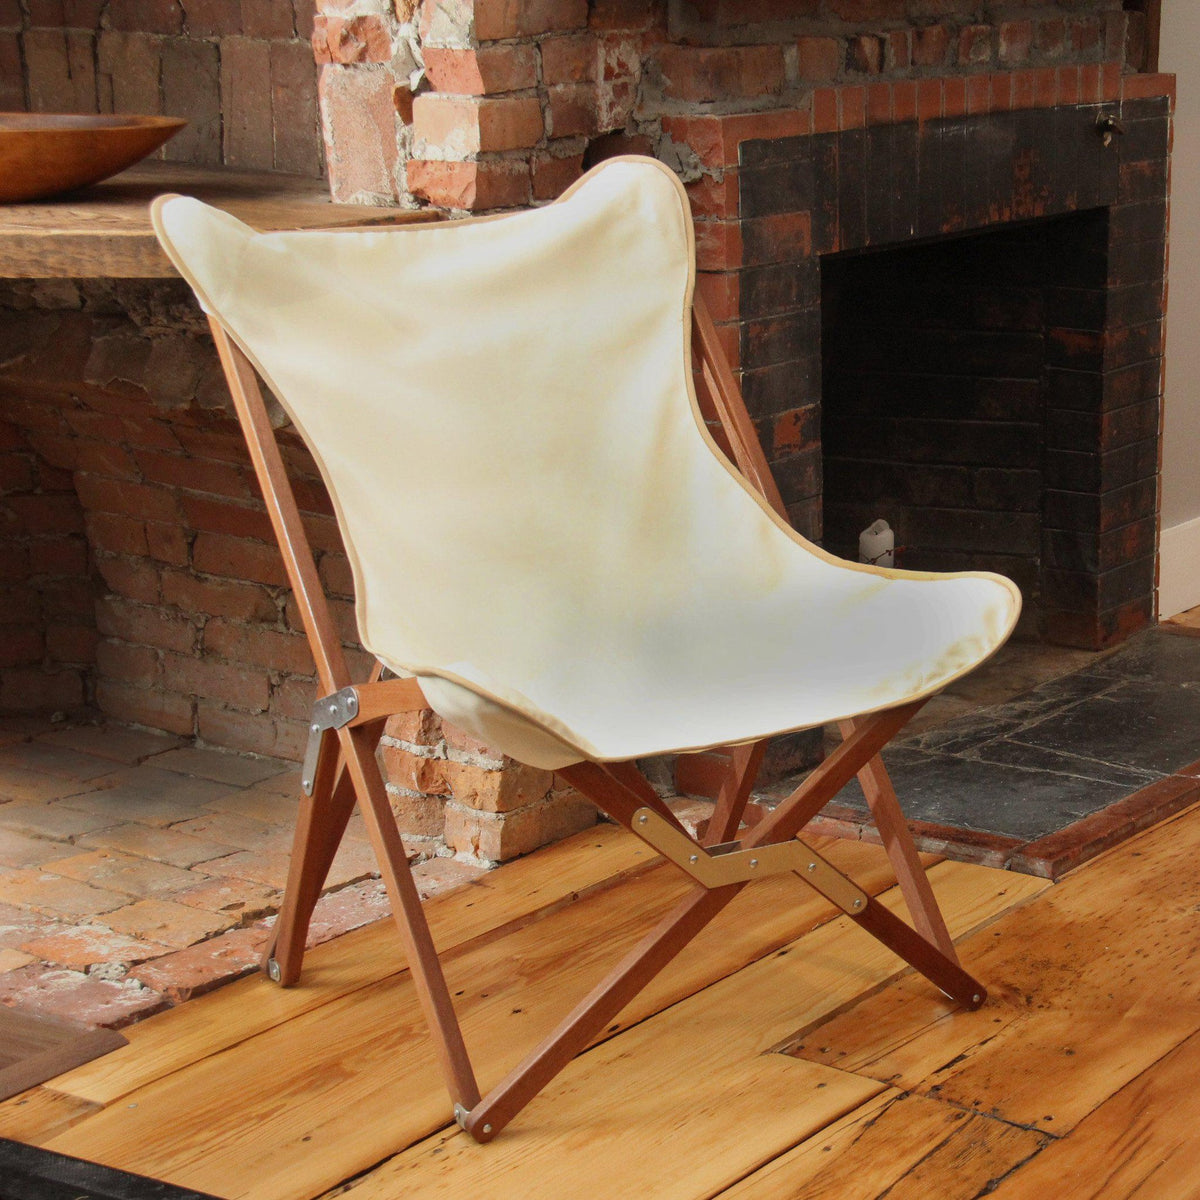 Butterfly Chair, from Byer of Maine